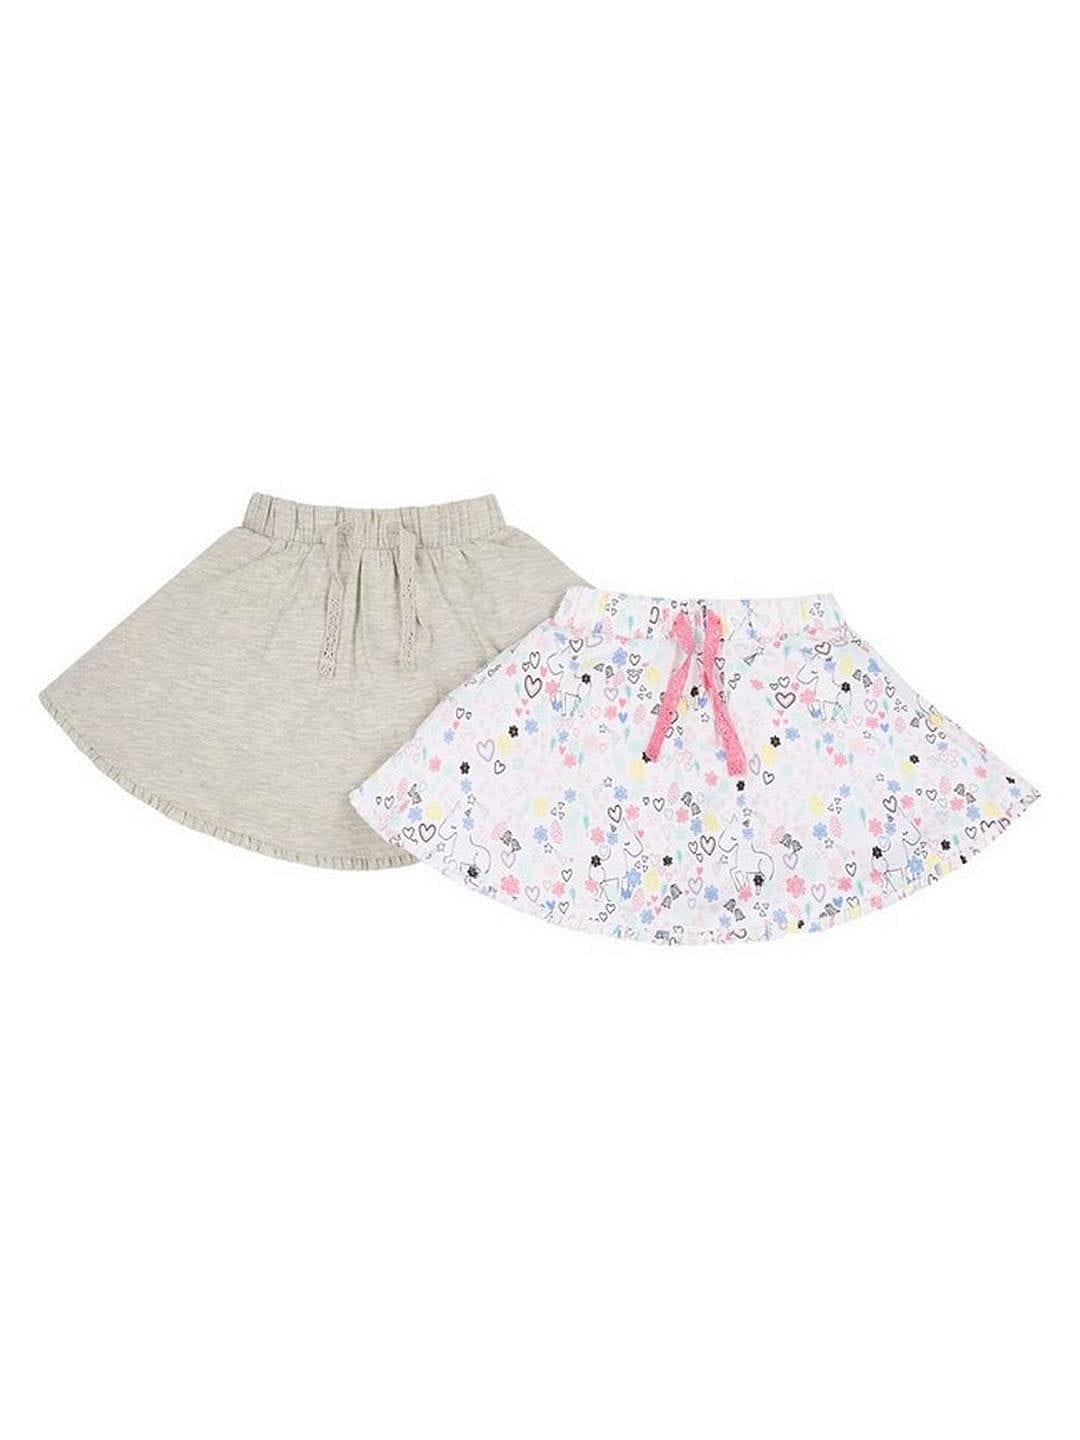 Mothercare | Multicoloured Printed Skirt - Pack of 2 0